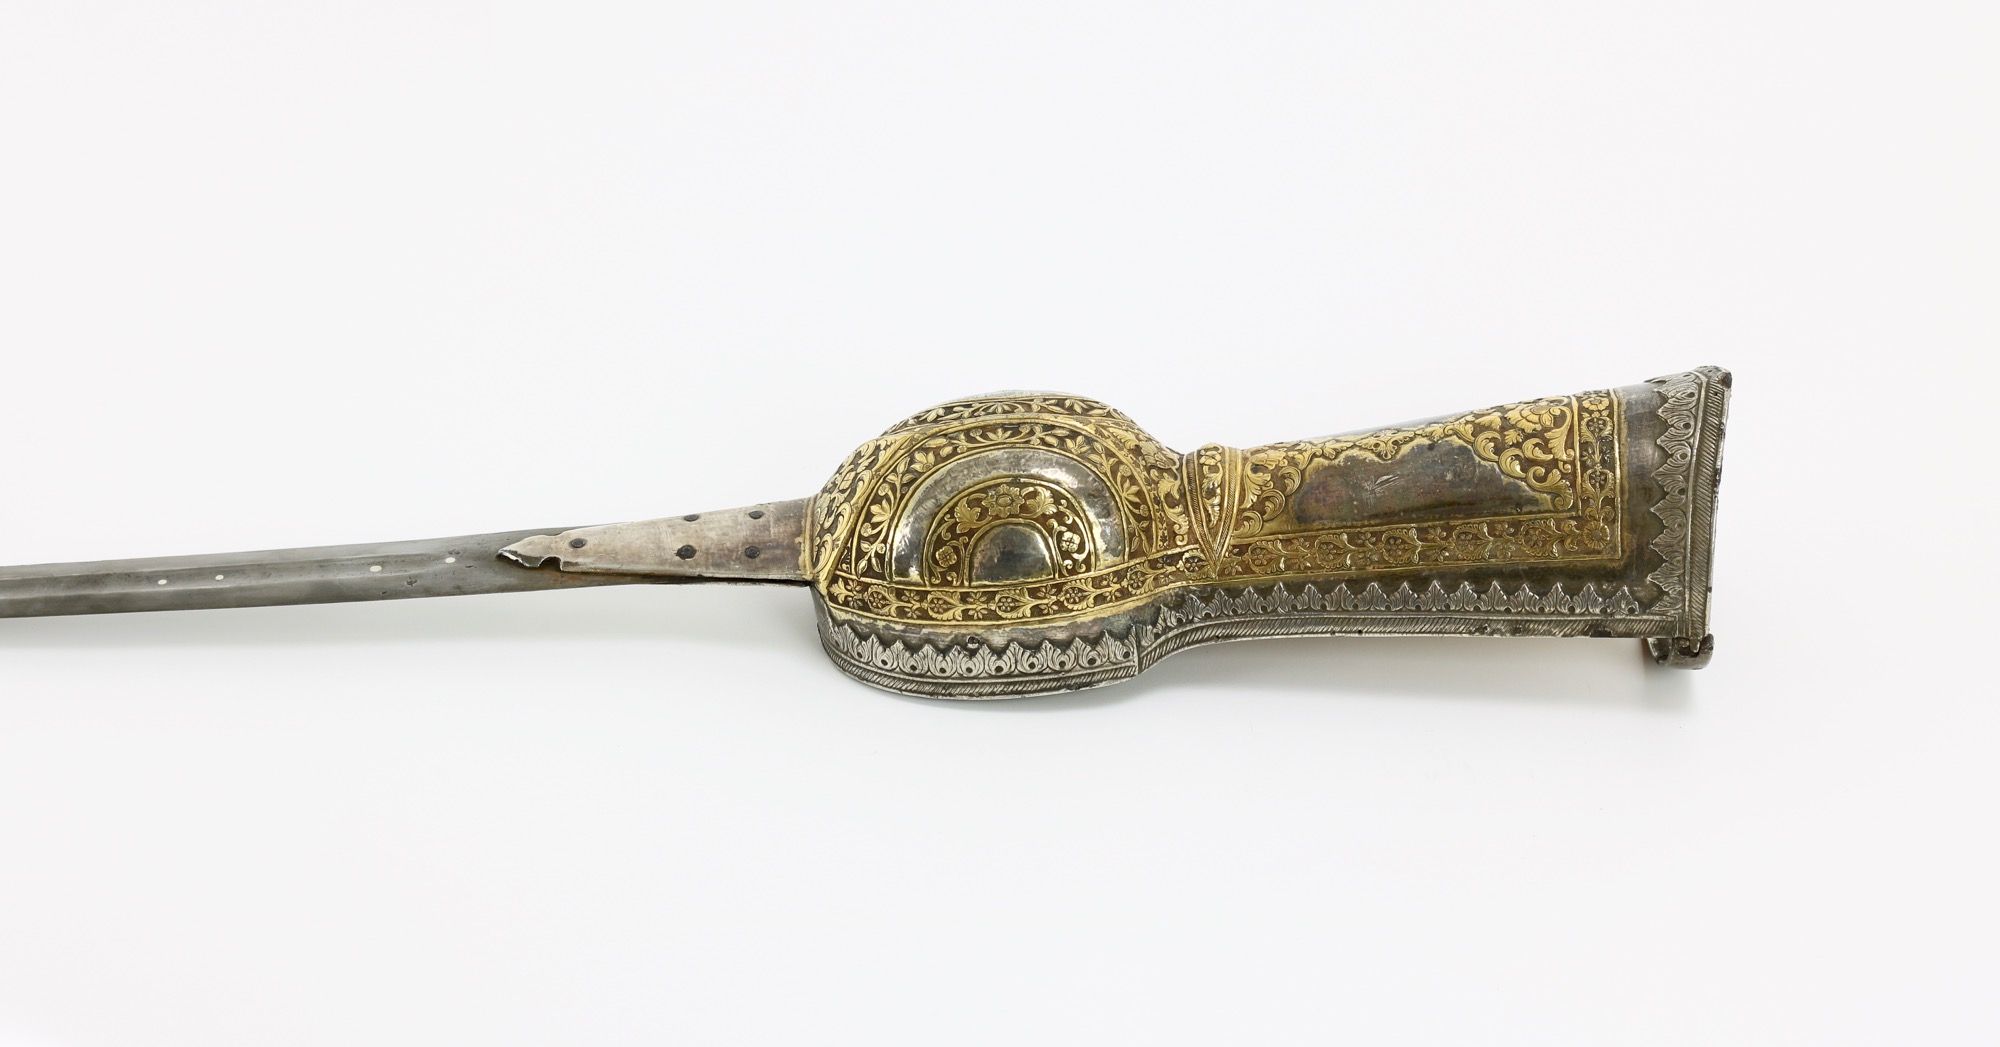 An Indian guantlet sword (pata) with Kutch style decoration